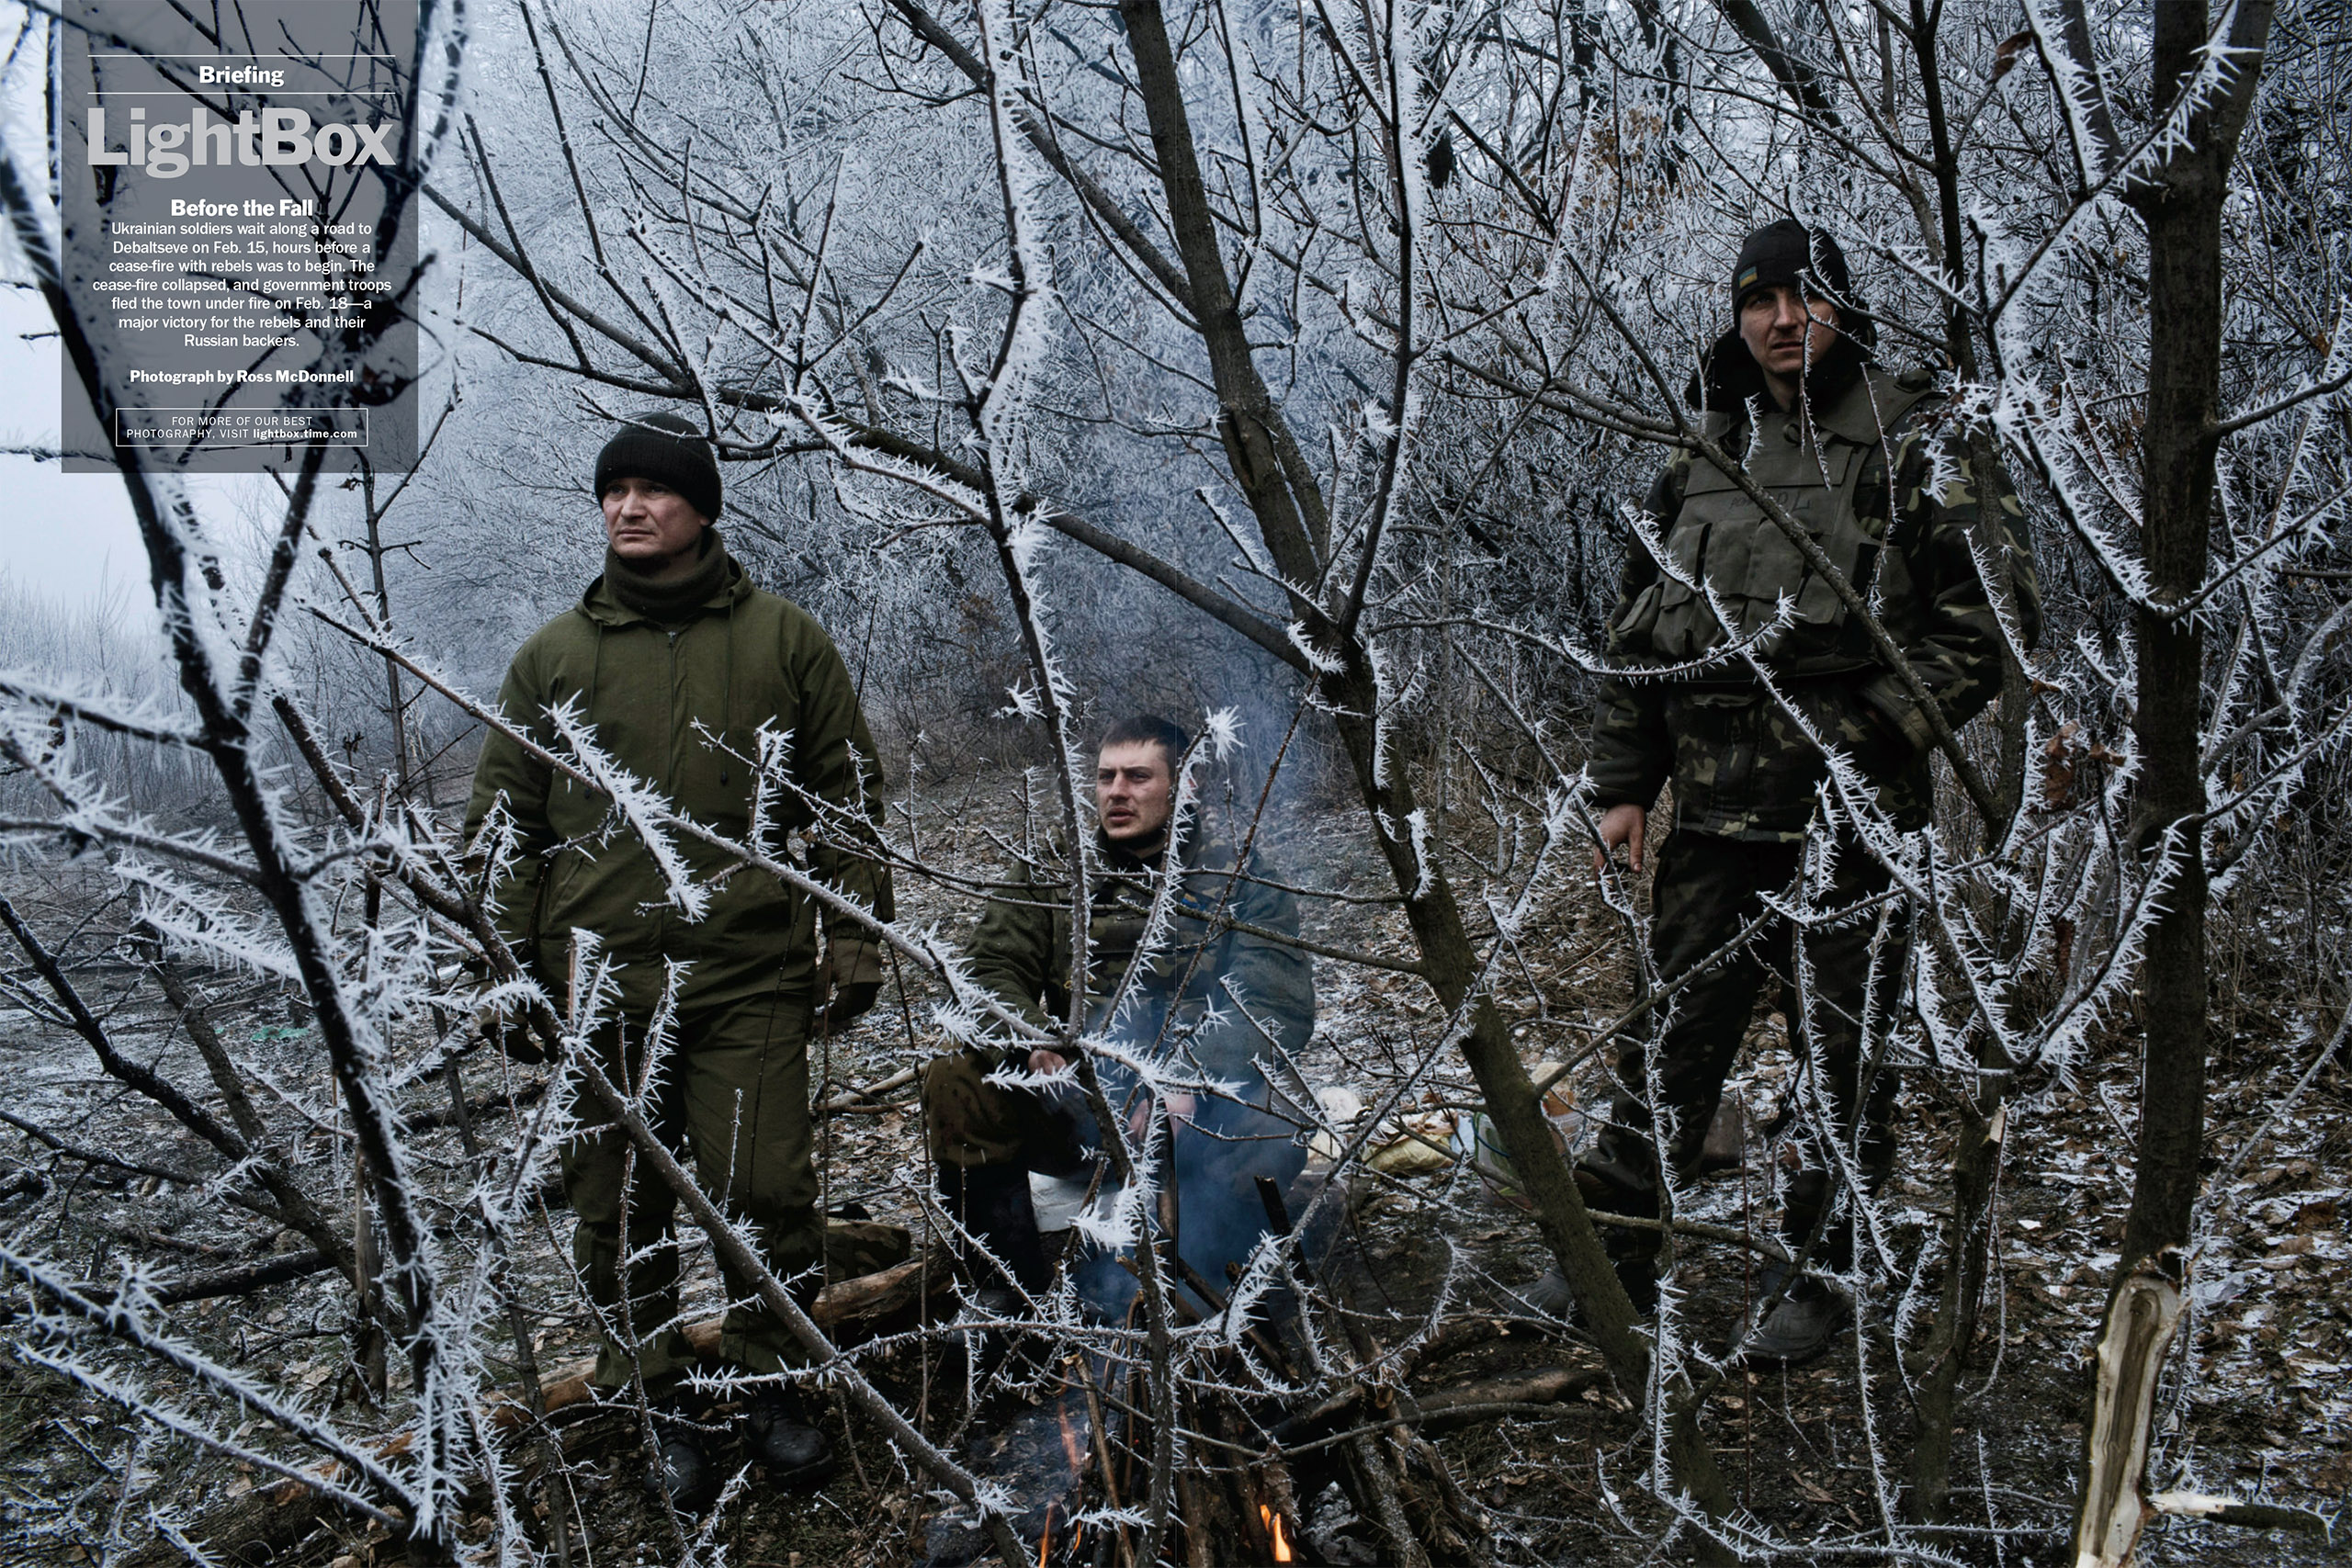 Photograph by Ross McDonnellUkrainian soldiers wait along a road to Debaltseve on Feb. 15, hours before a cease-fire with rebels was to begin. The cease-fire collapsed, and government troops fled the town under fire on Feb. 18—a major victory for the rebels and their Russian backers. (TIME issue March 9, 2015)